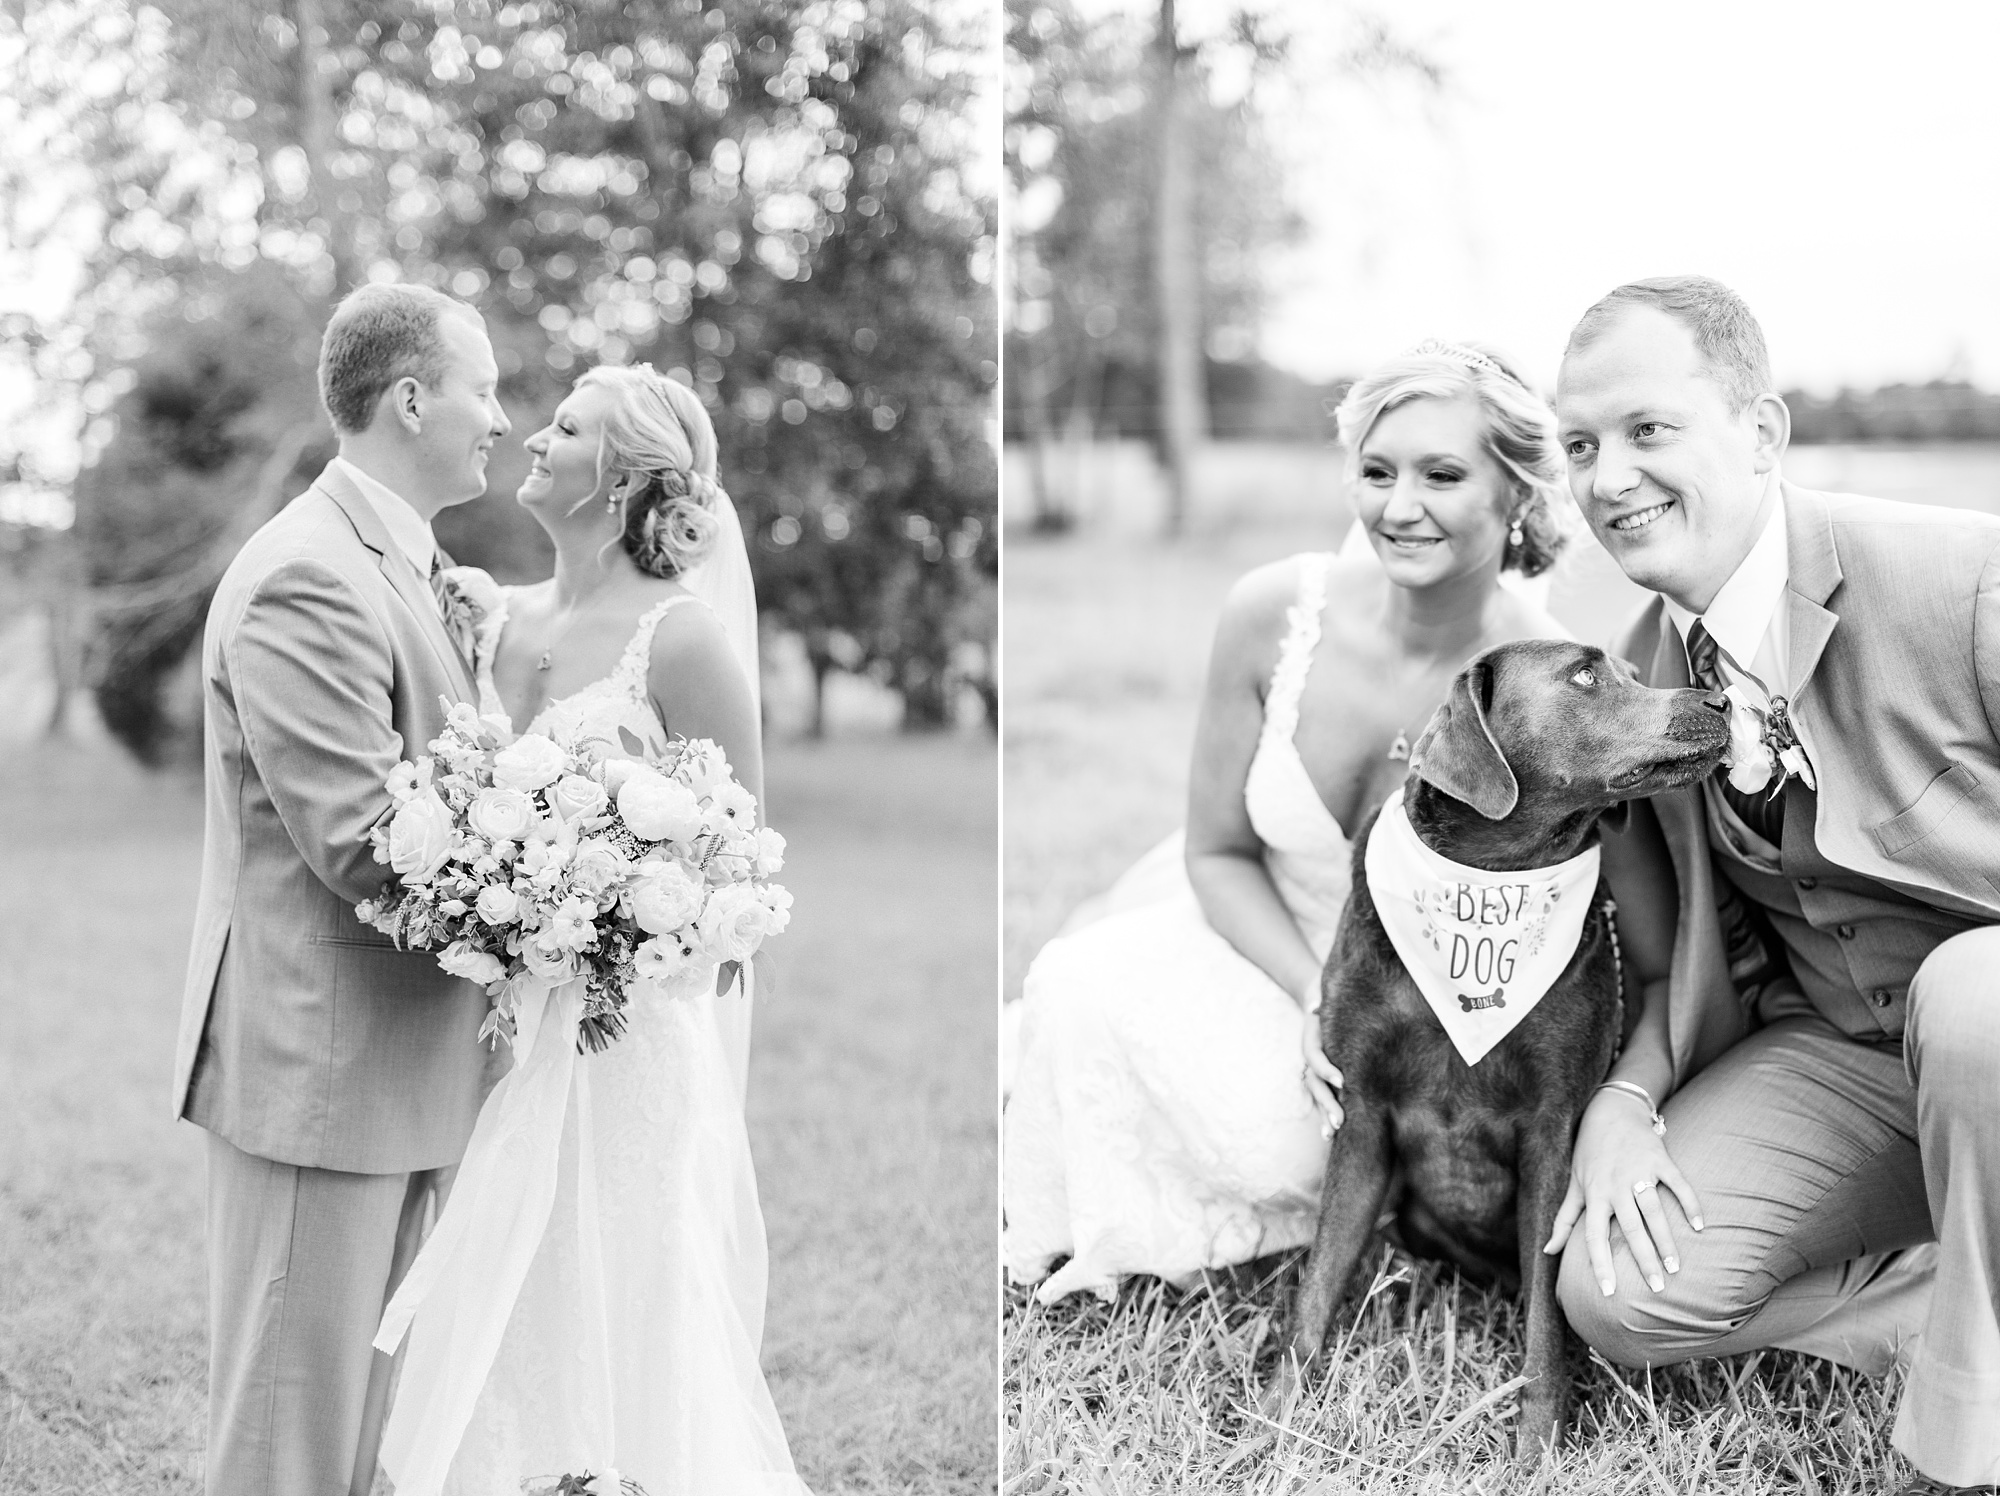 Farm at Brusharbor wedding day with Disney inspired details